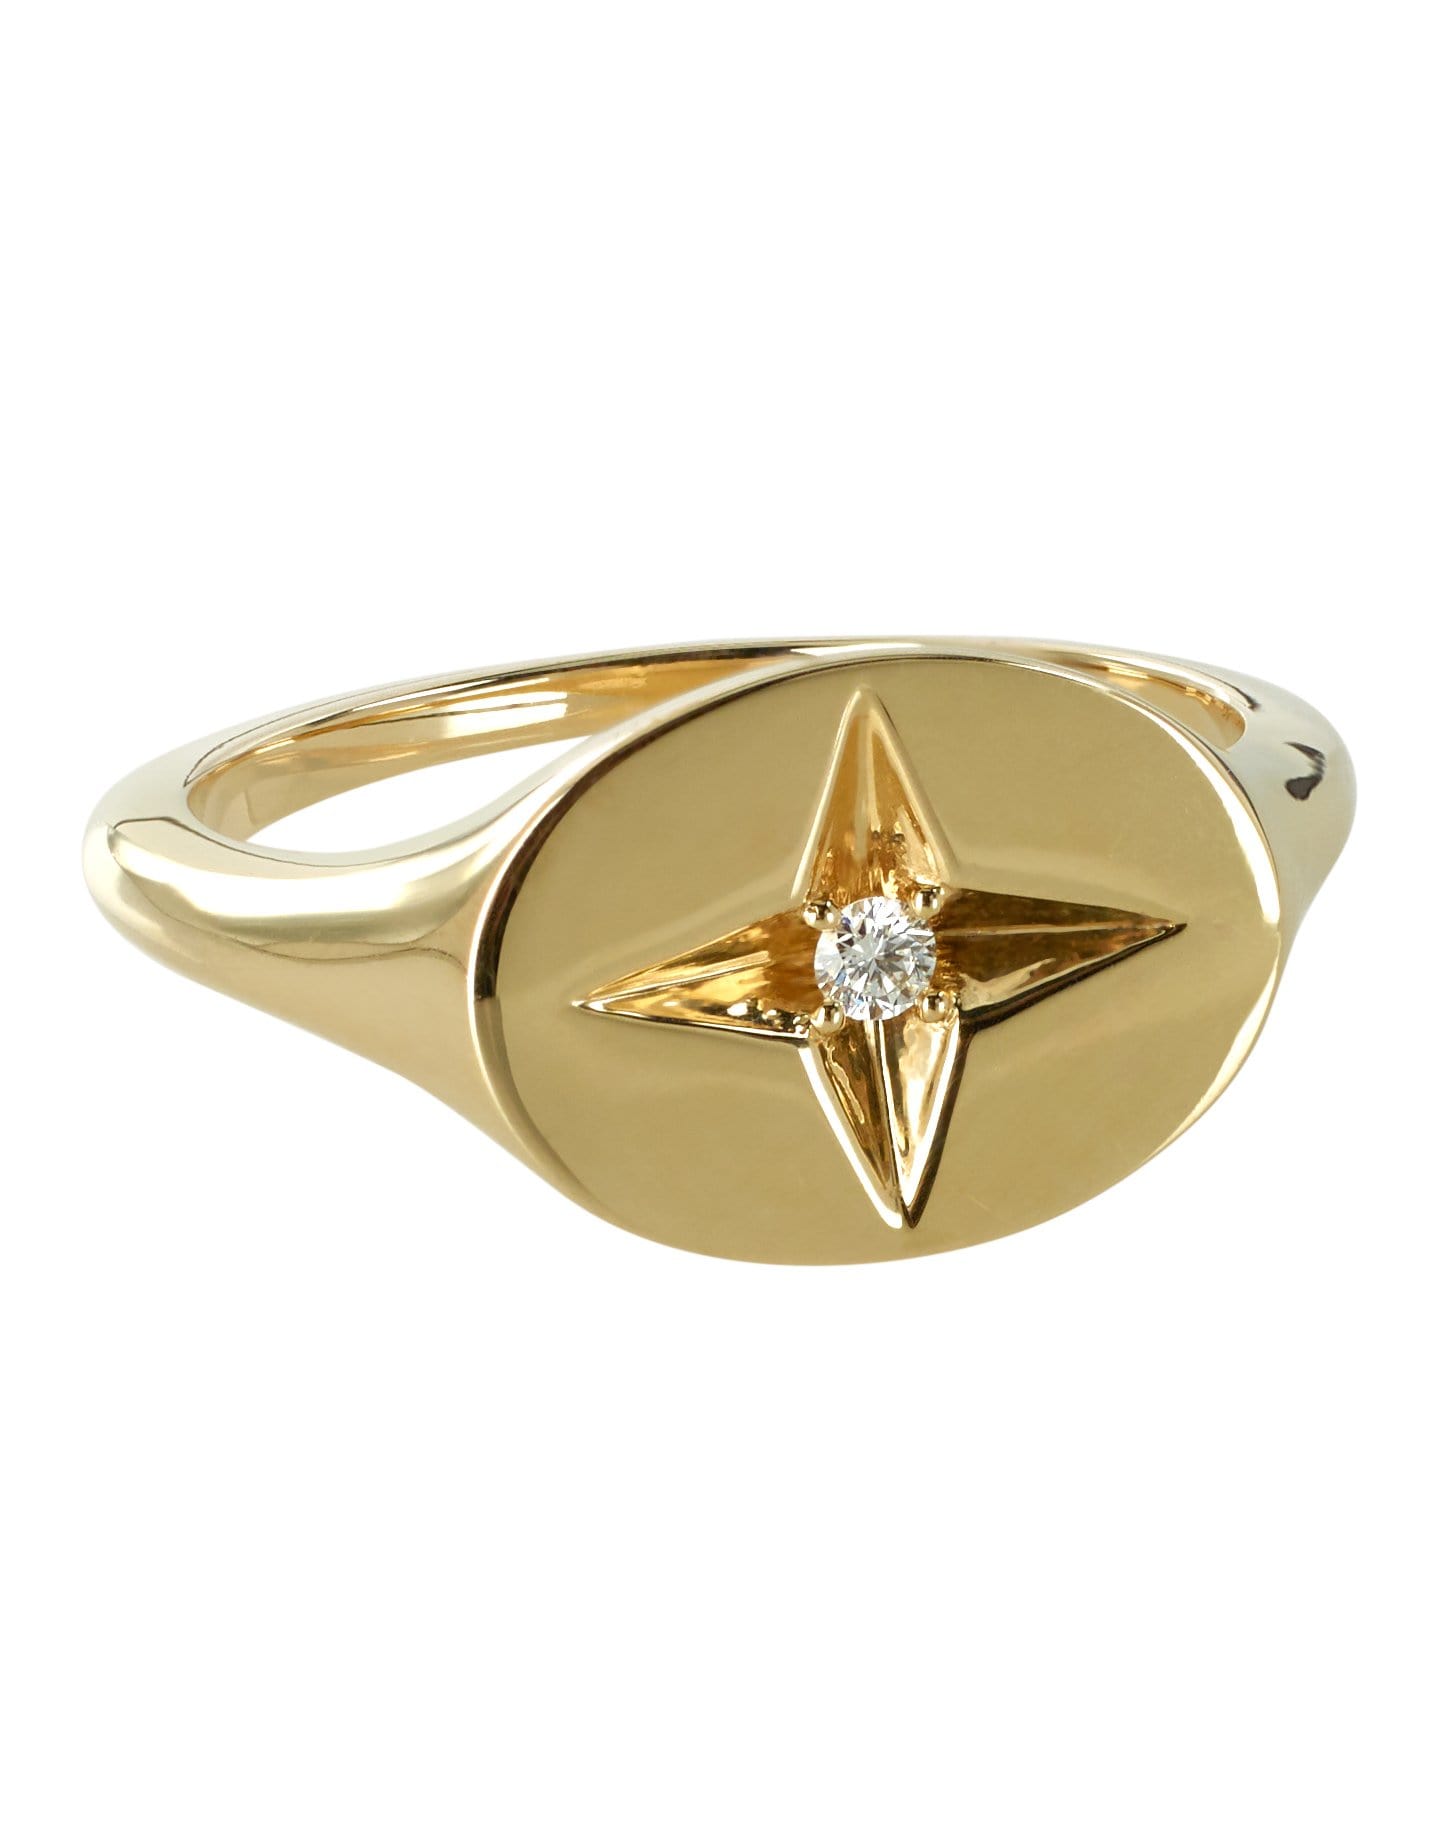 MARLO LAZ-Guiding Star Pinky Ring-YELLOW GOLD